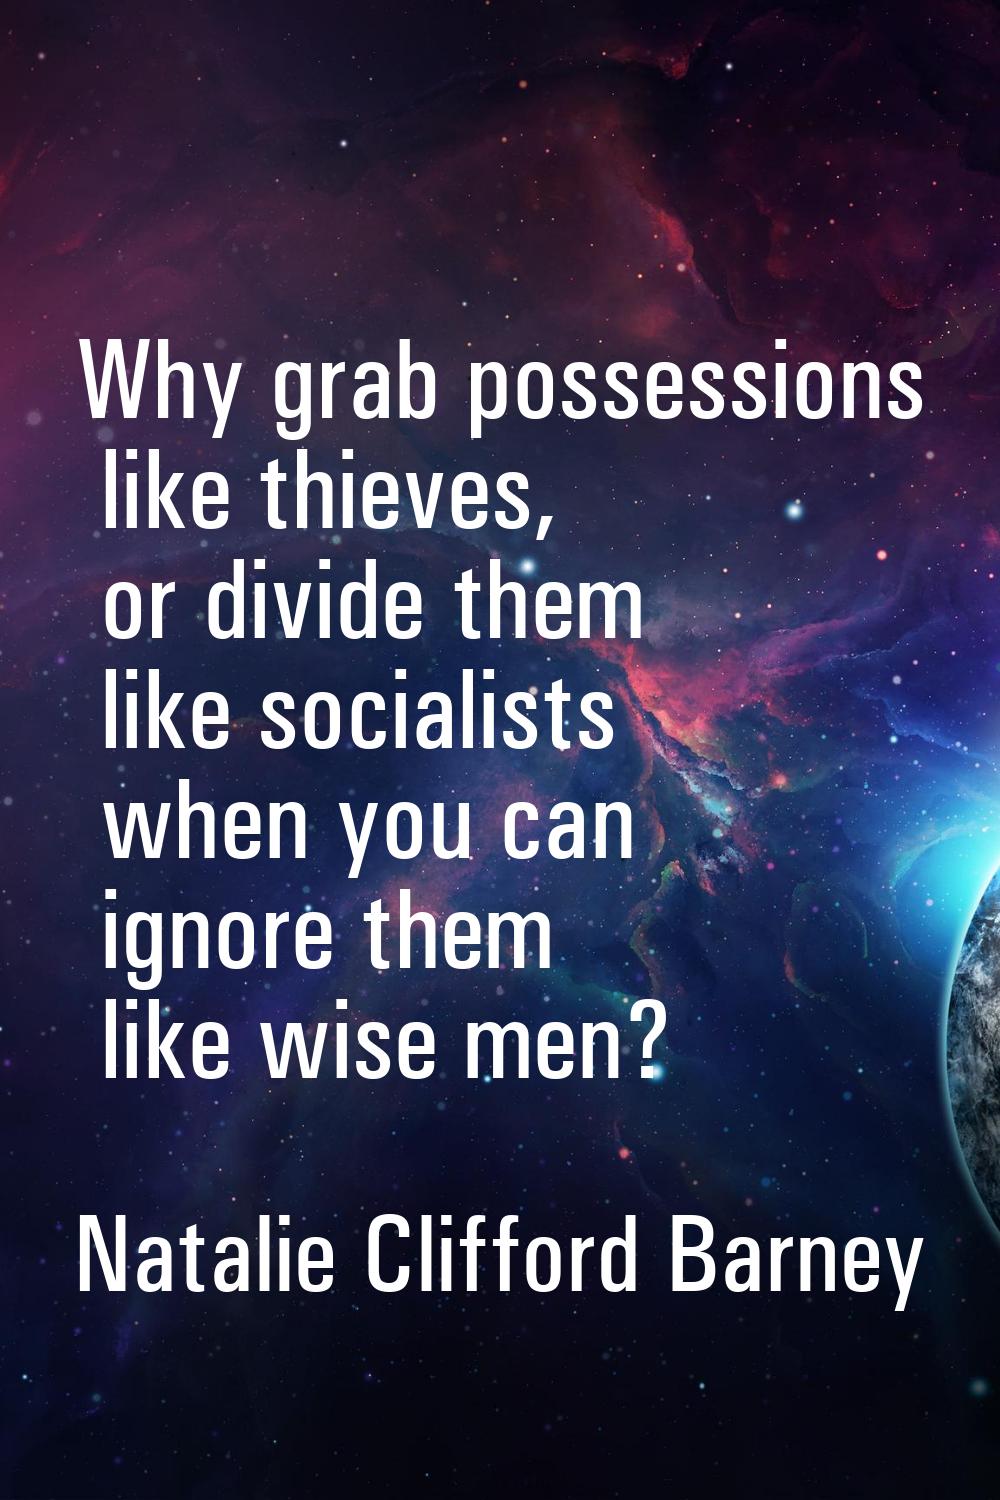 Why grab possessions like thieves, or divide them like socialists when you can ignore them like wis